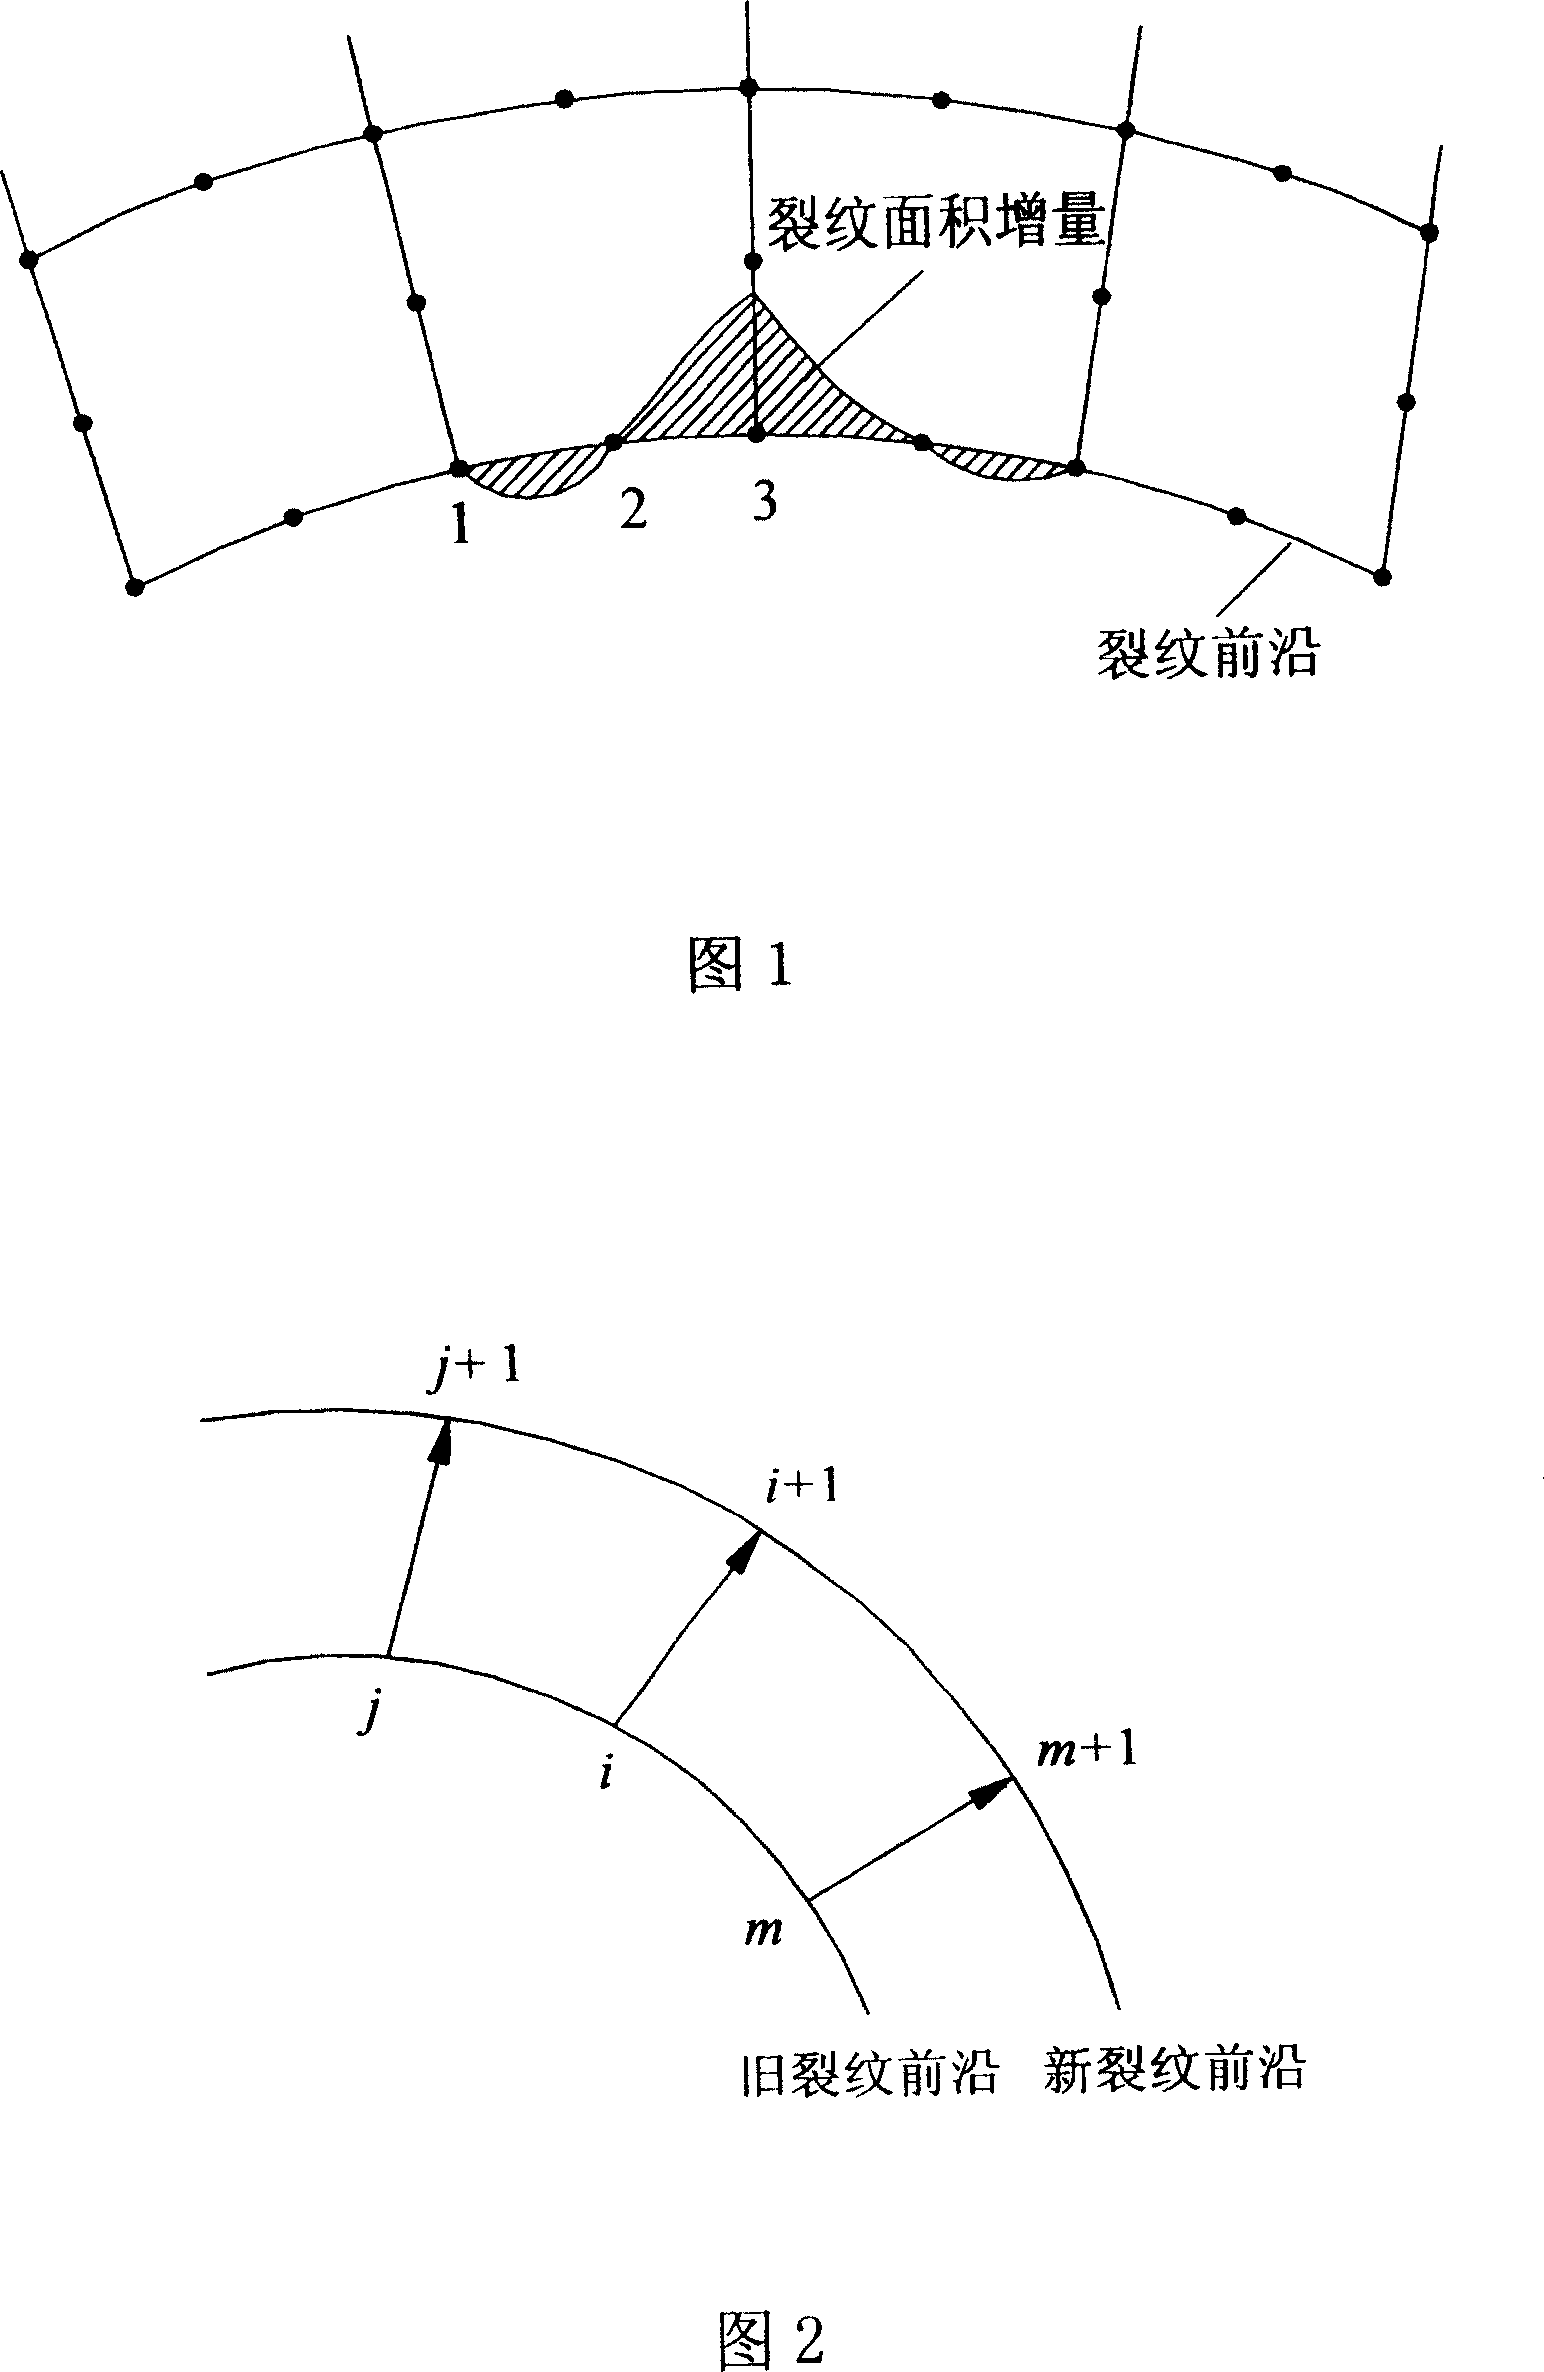 Fatigue life safety predicting method for pressure container